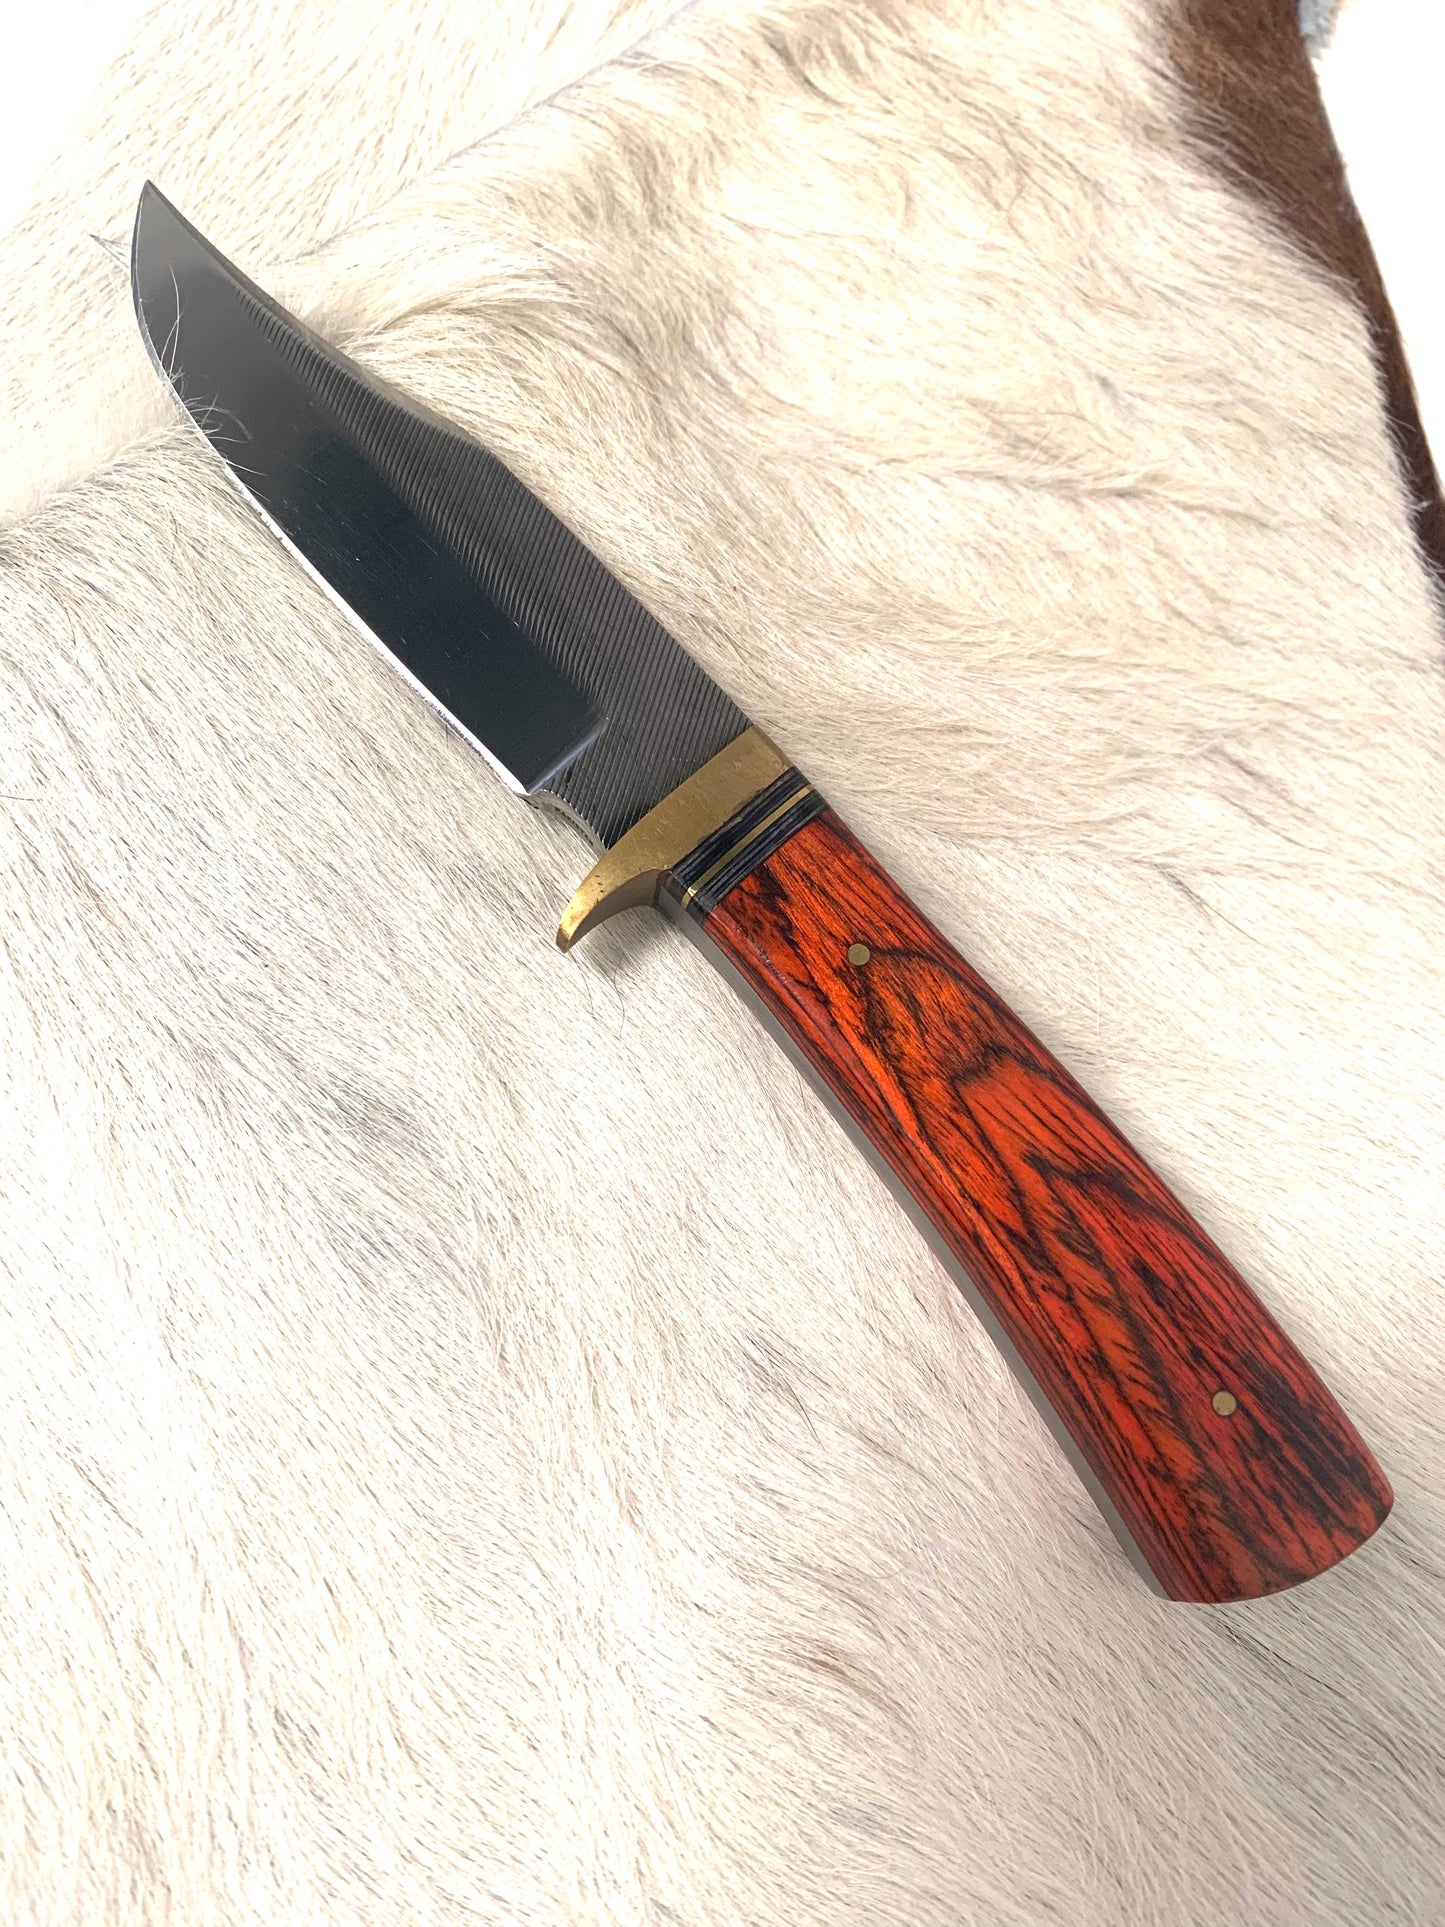 SM0023 Western Fashion Natural Wood Fixed Blade Knife